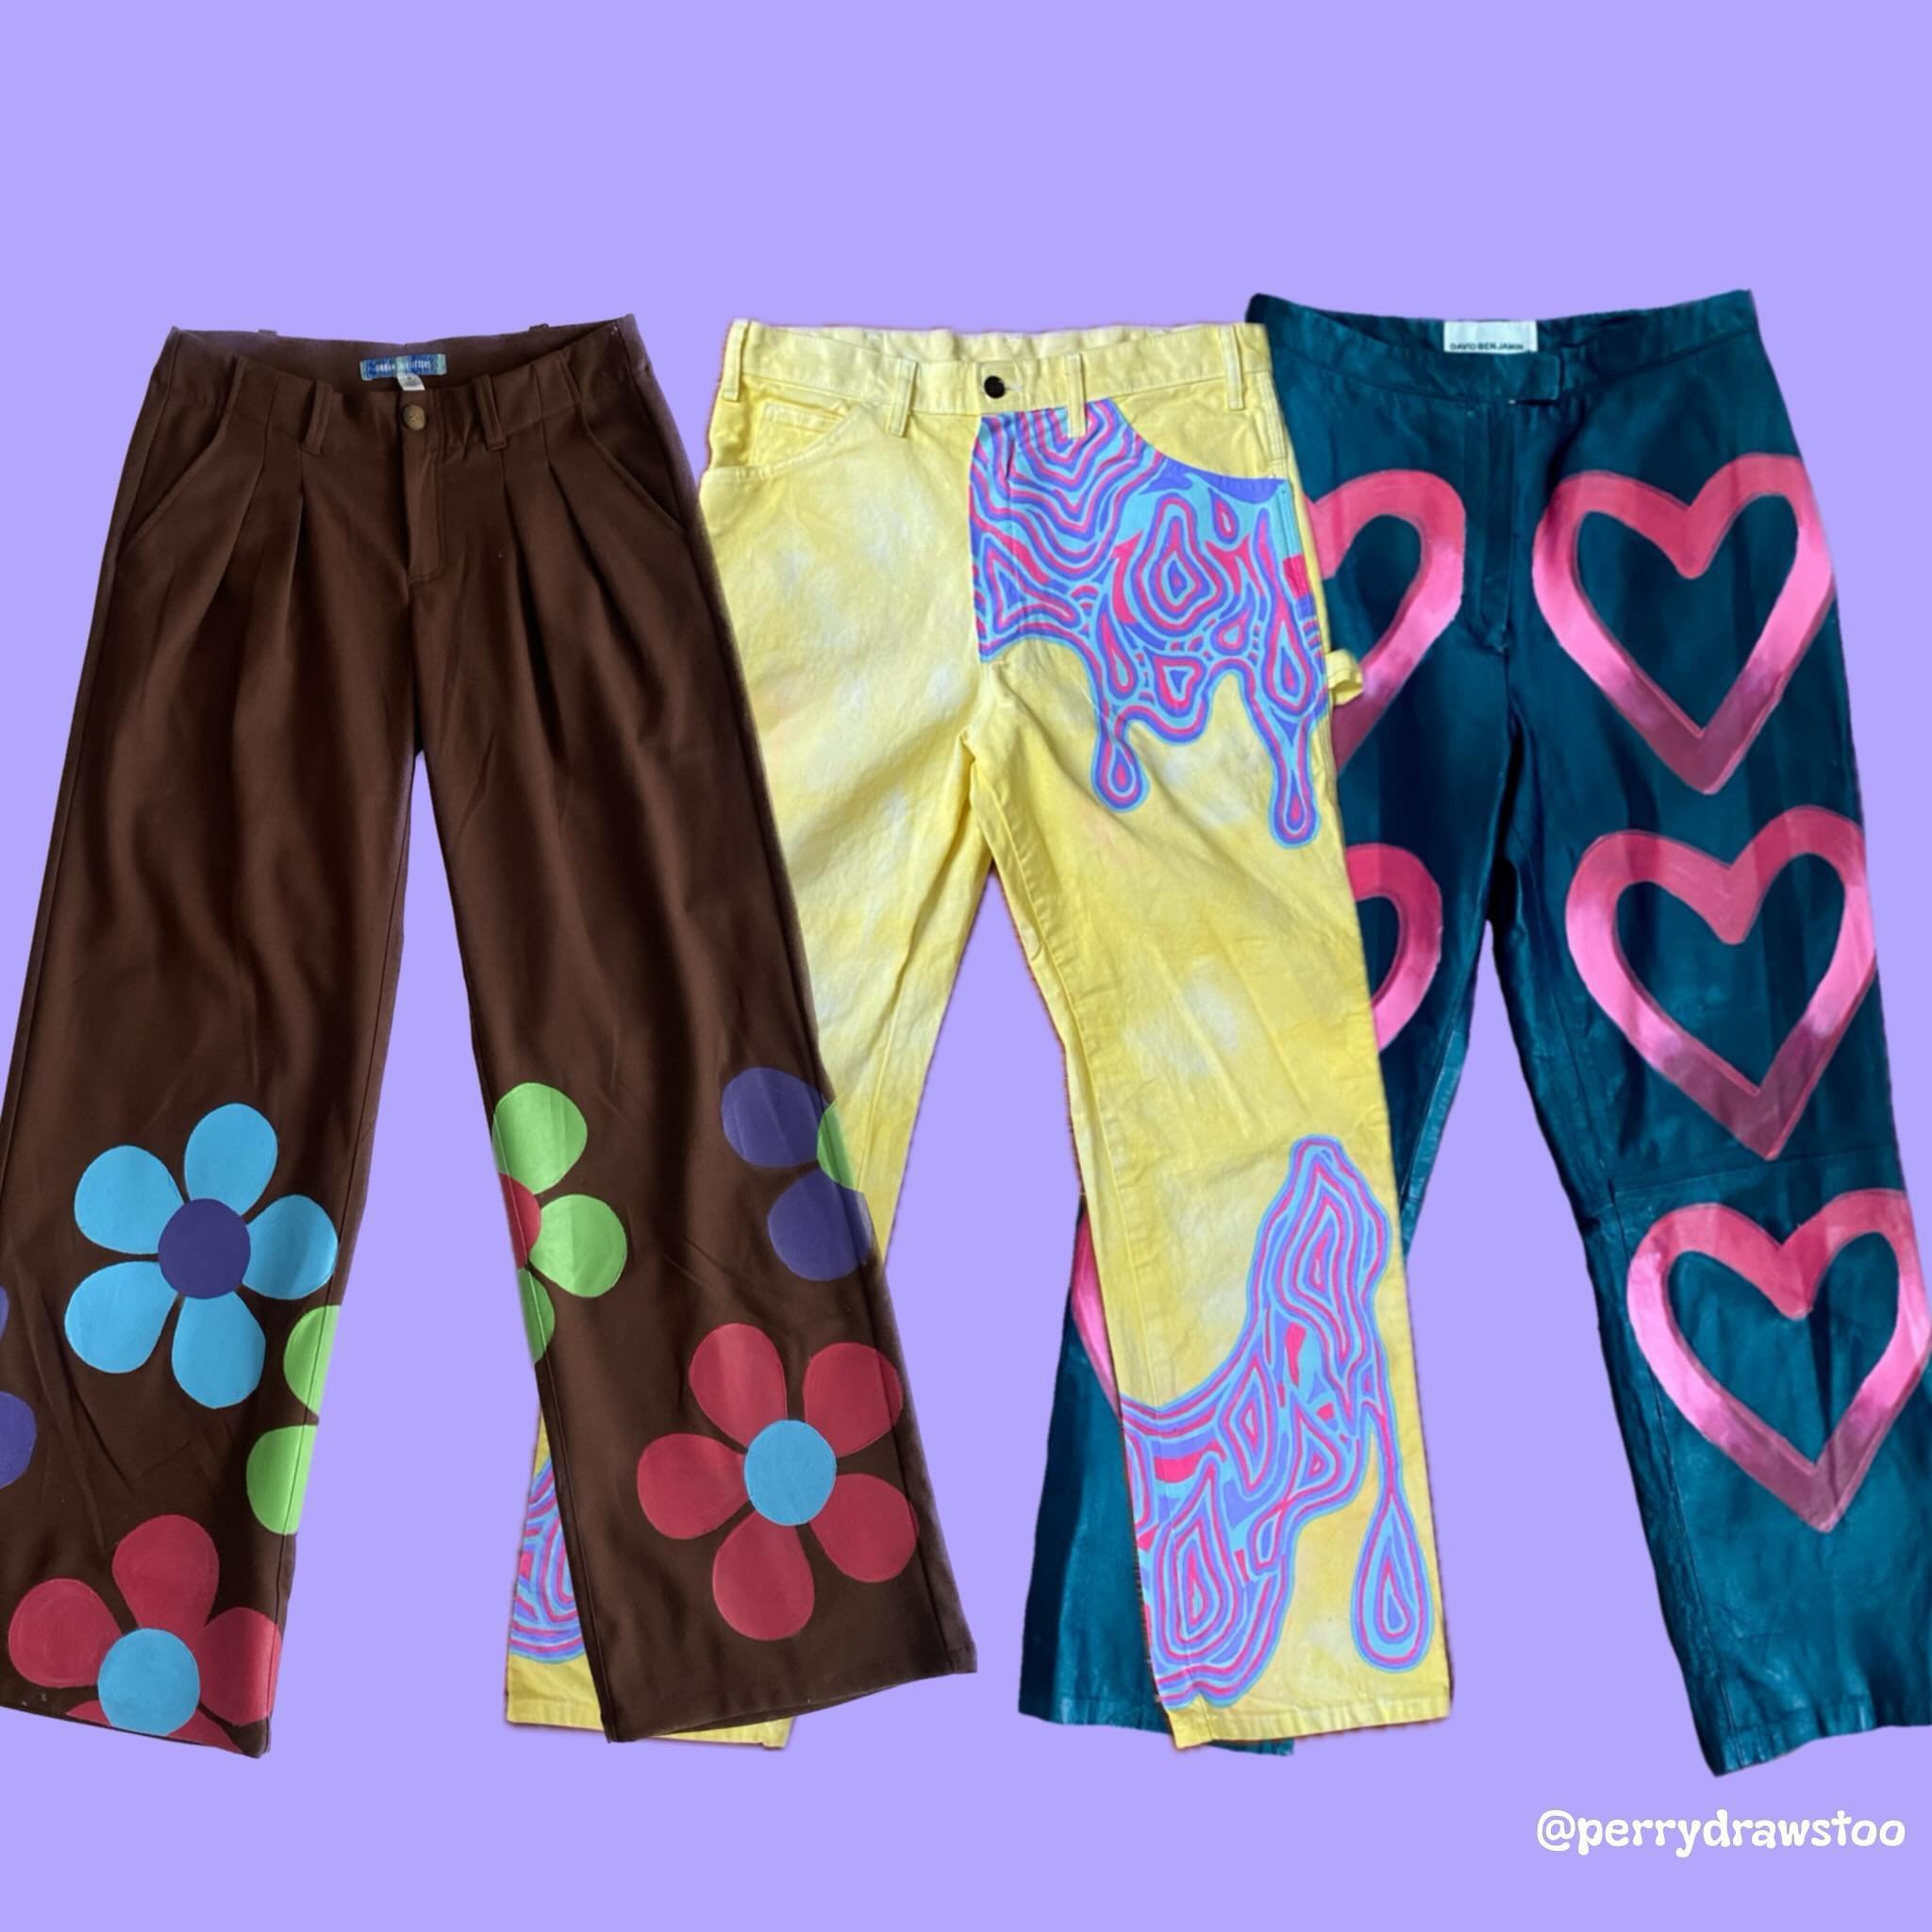 Who wears the pants? Featuring the cutest hand-painted pants available NOW &mdash; and remember, even the pants in your closet can get a retouch by yours truly! DM to order a customized commission and let&rsquo;s collaborate!

SIZING:
✨Flower Power P